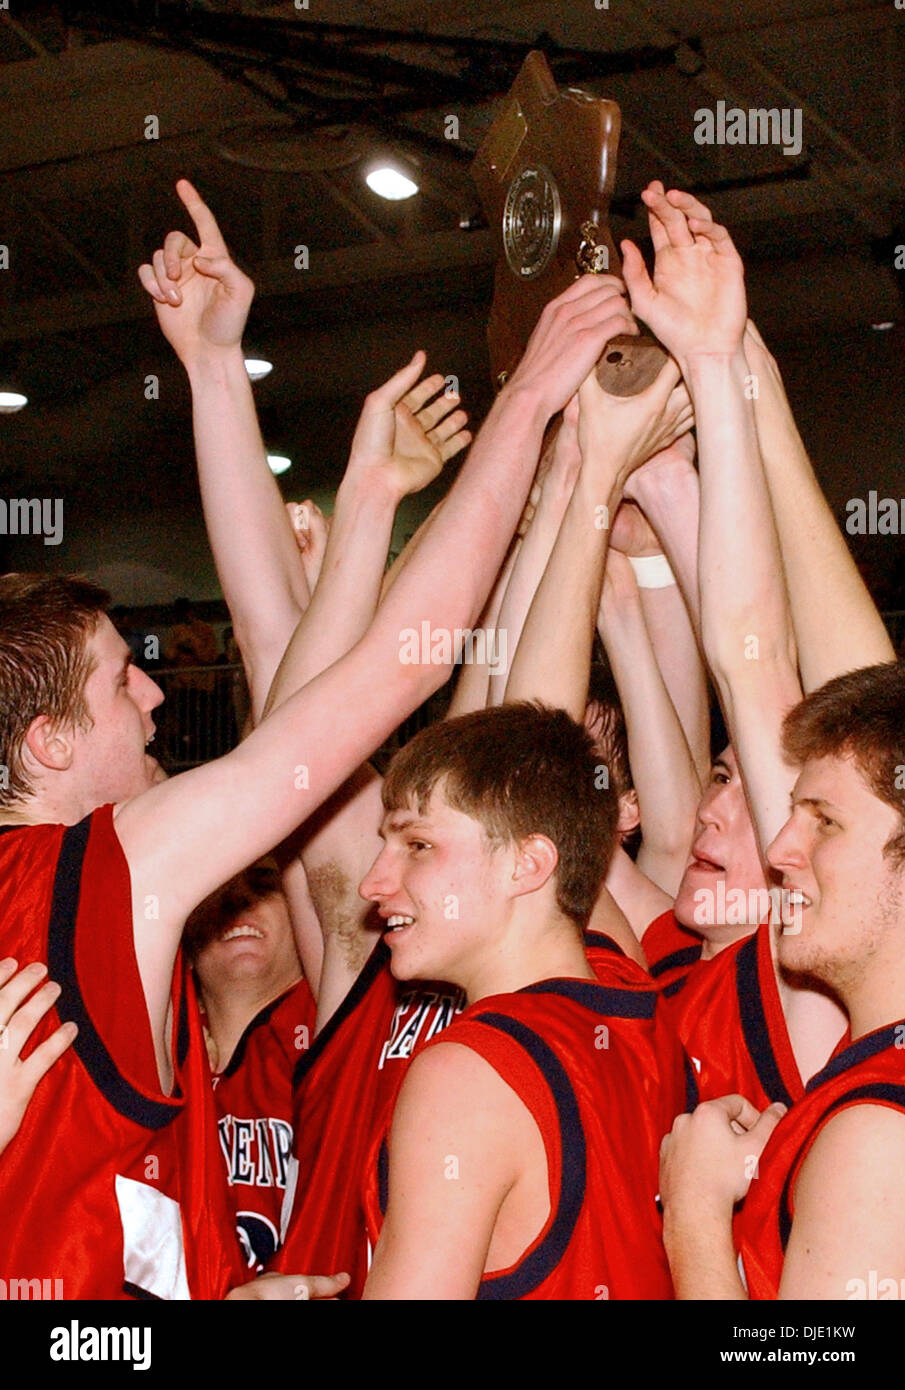 Mar 15, 2003 - Union, Kentucky, USA - St. Henry High School team members hold their trophy for their win over Simon Kenton High School. The final score was 49 to 53 for the Kentucky 9th Region Boys Basketball Championship.  (Credit Image: © Ken Stewart/ZUMA Press) Stock Photo